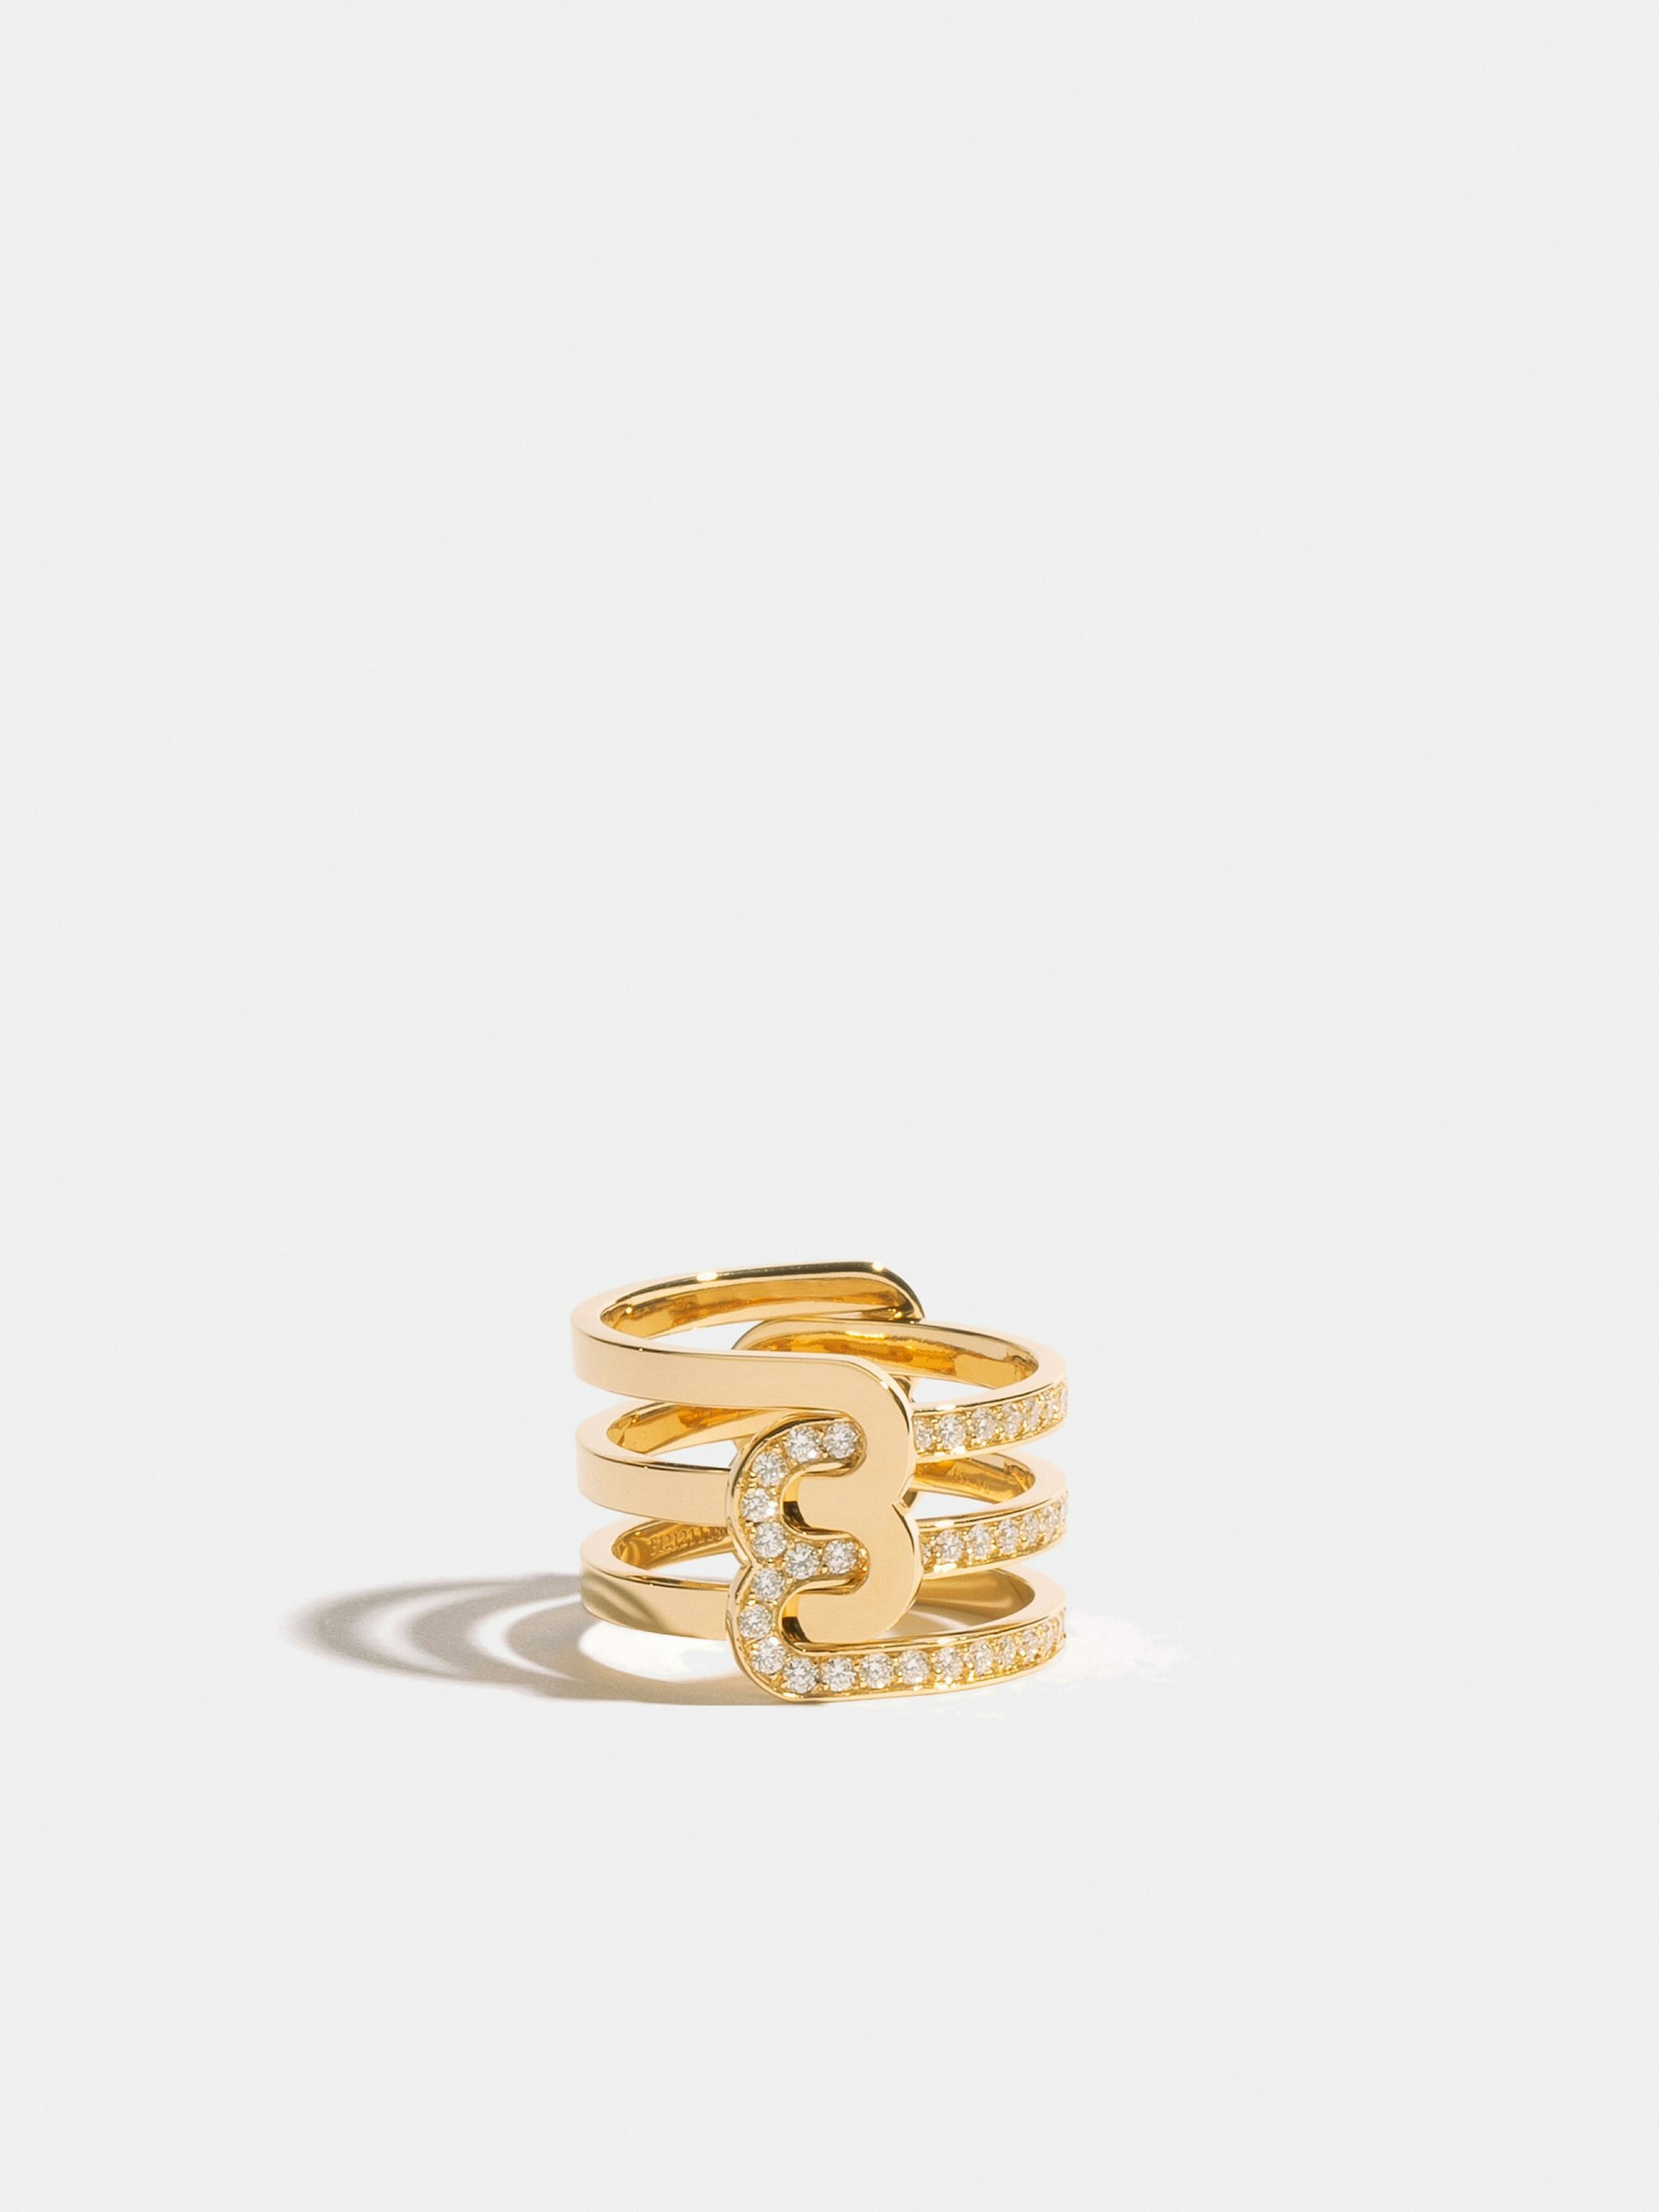 Ethical 18k yellow gold Fairmined ring composed of a double half-ring polished finish and a double half-ring paved with synthetic diamonds.